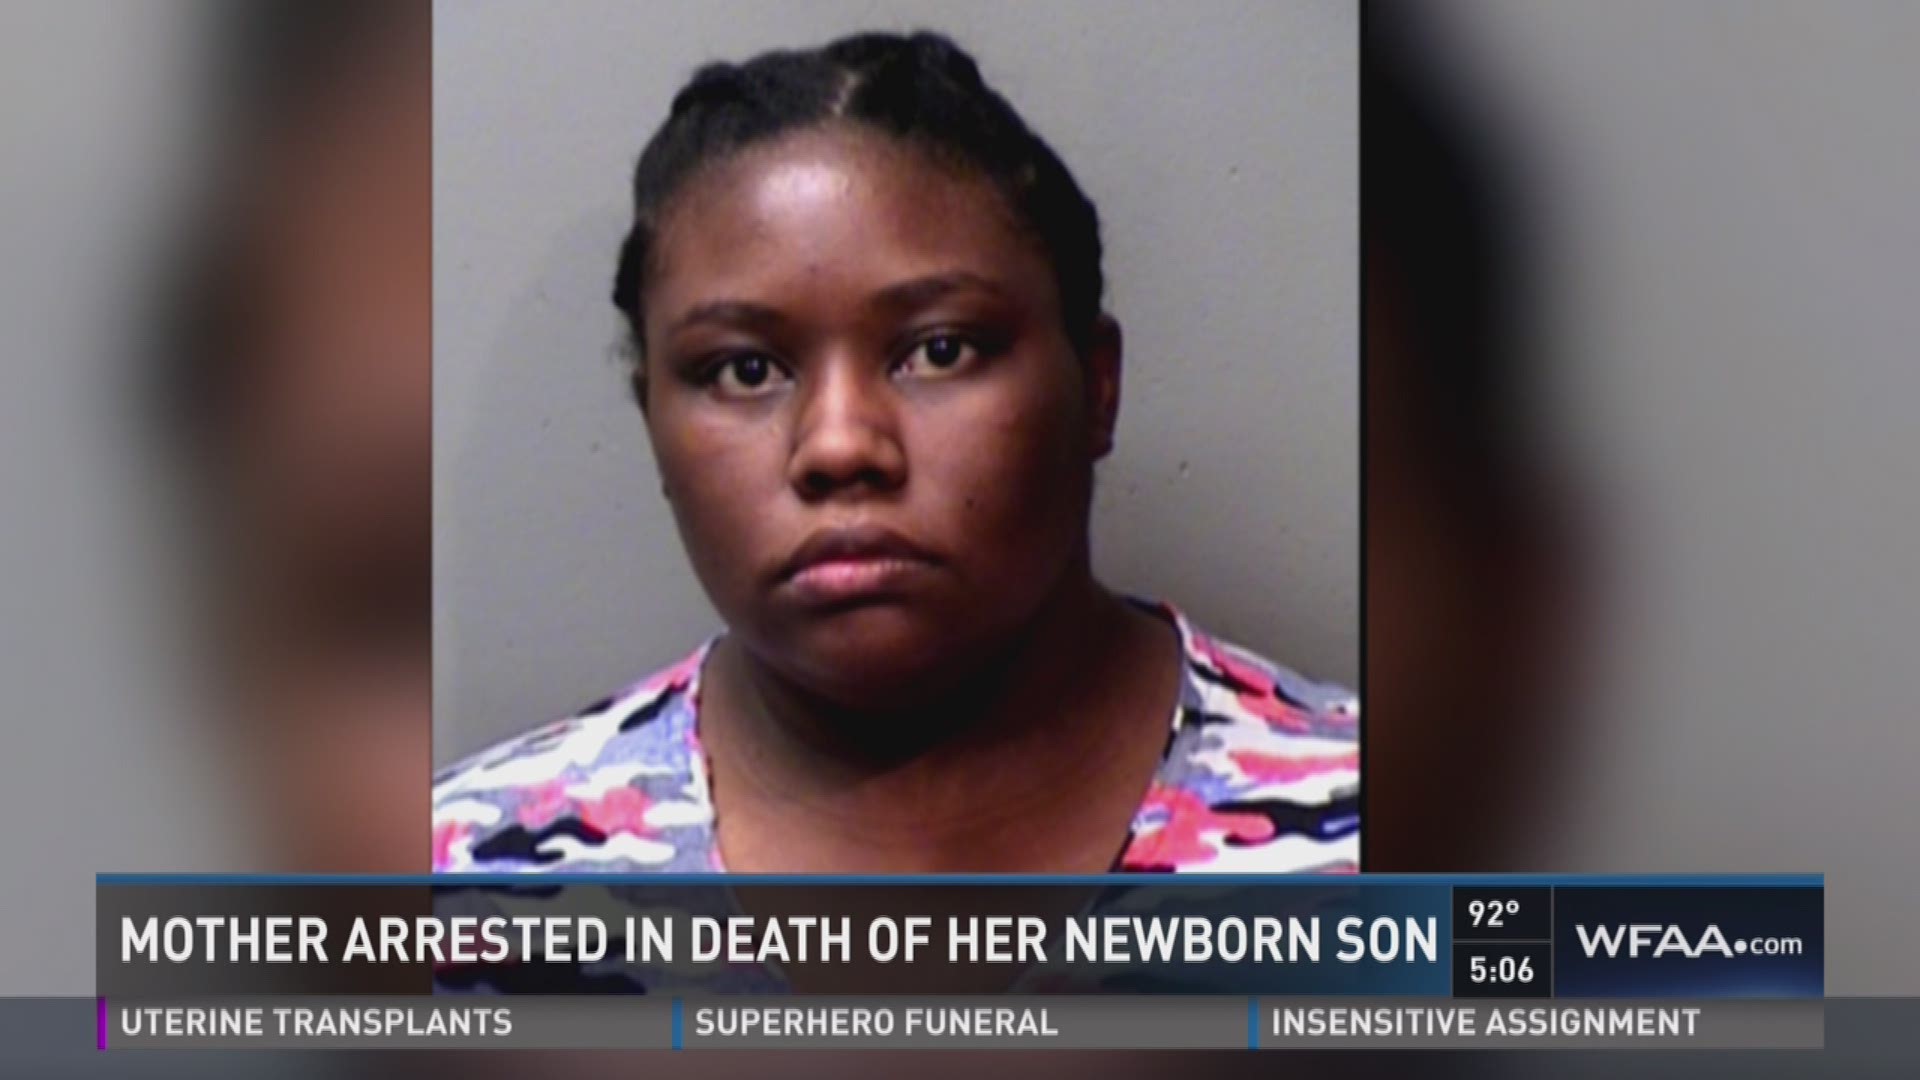 Mother Arrested for death of newborn son